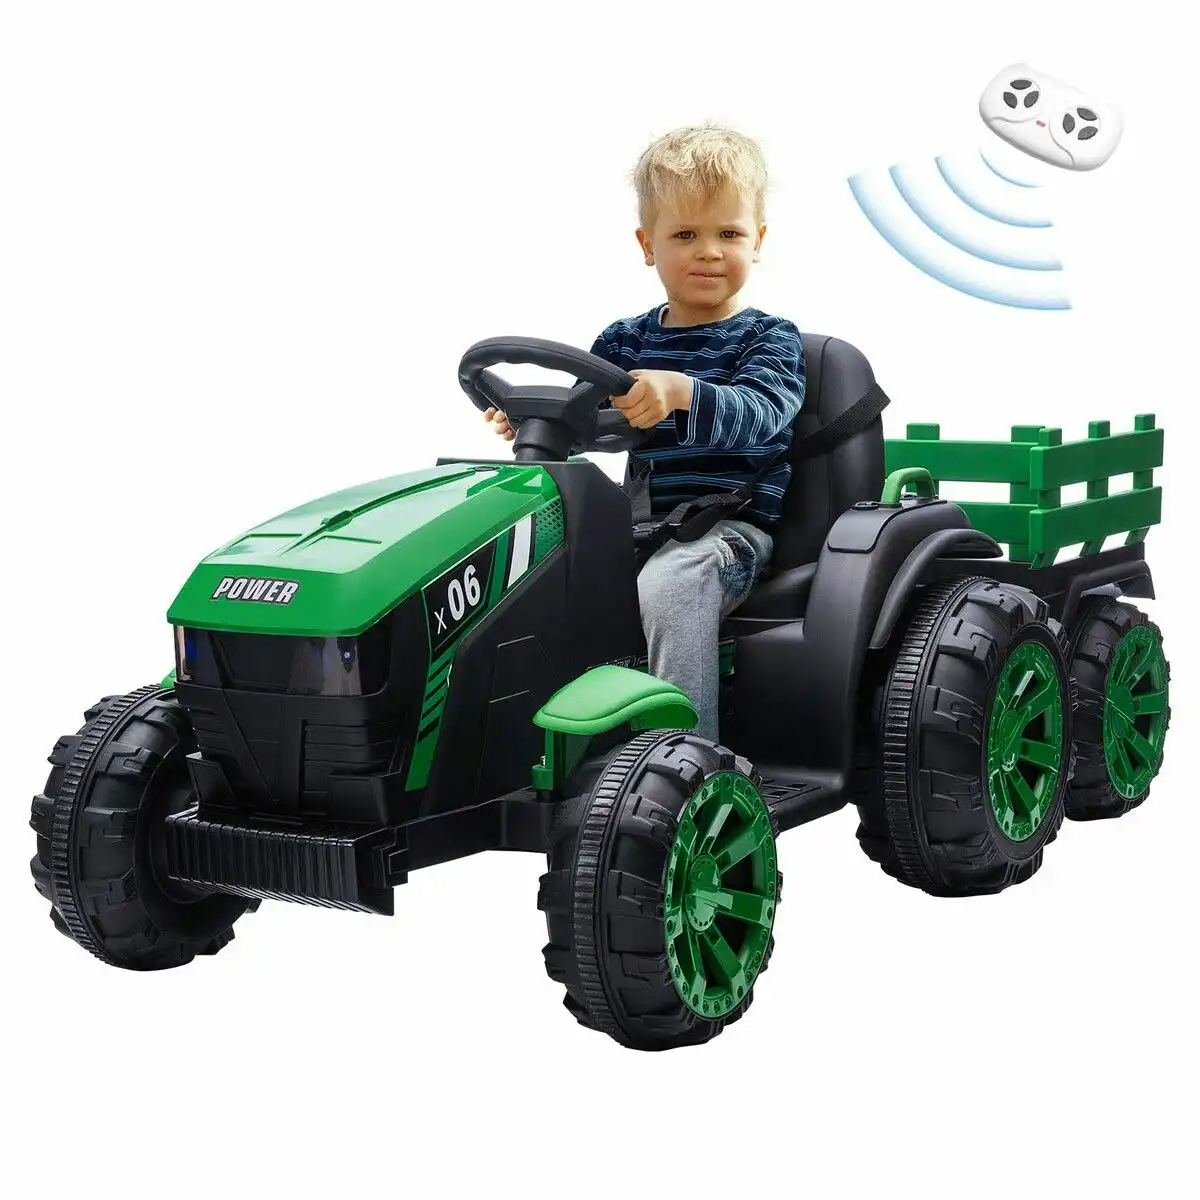 Kidbot Kids Ride on Car Remote Control Electric Tractor Toy Vehicle Trailer 12V Battery MP3 Player Safety Belt LED Light Green